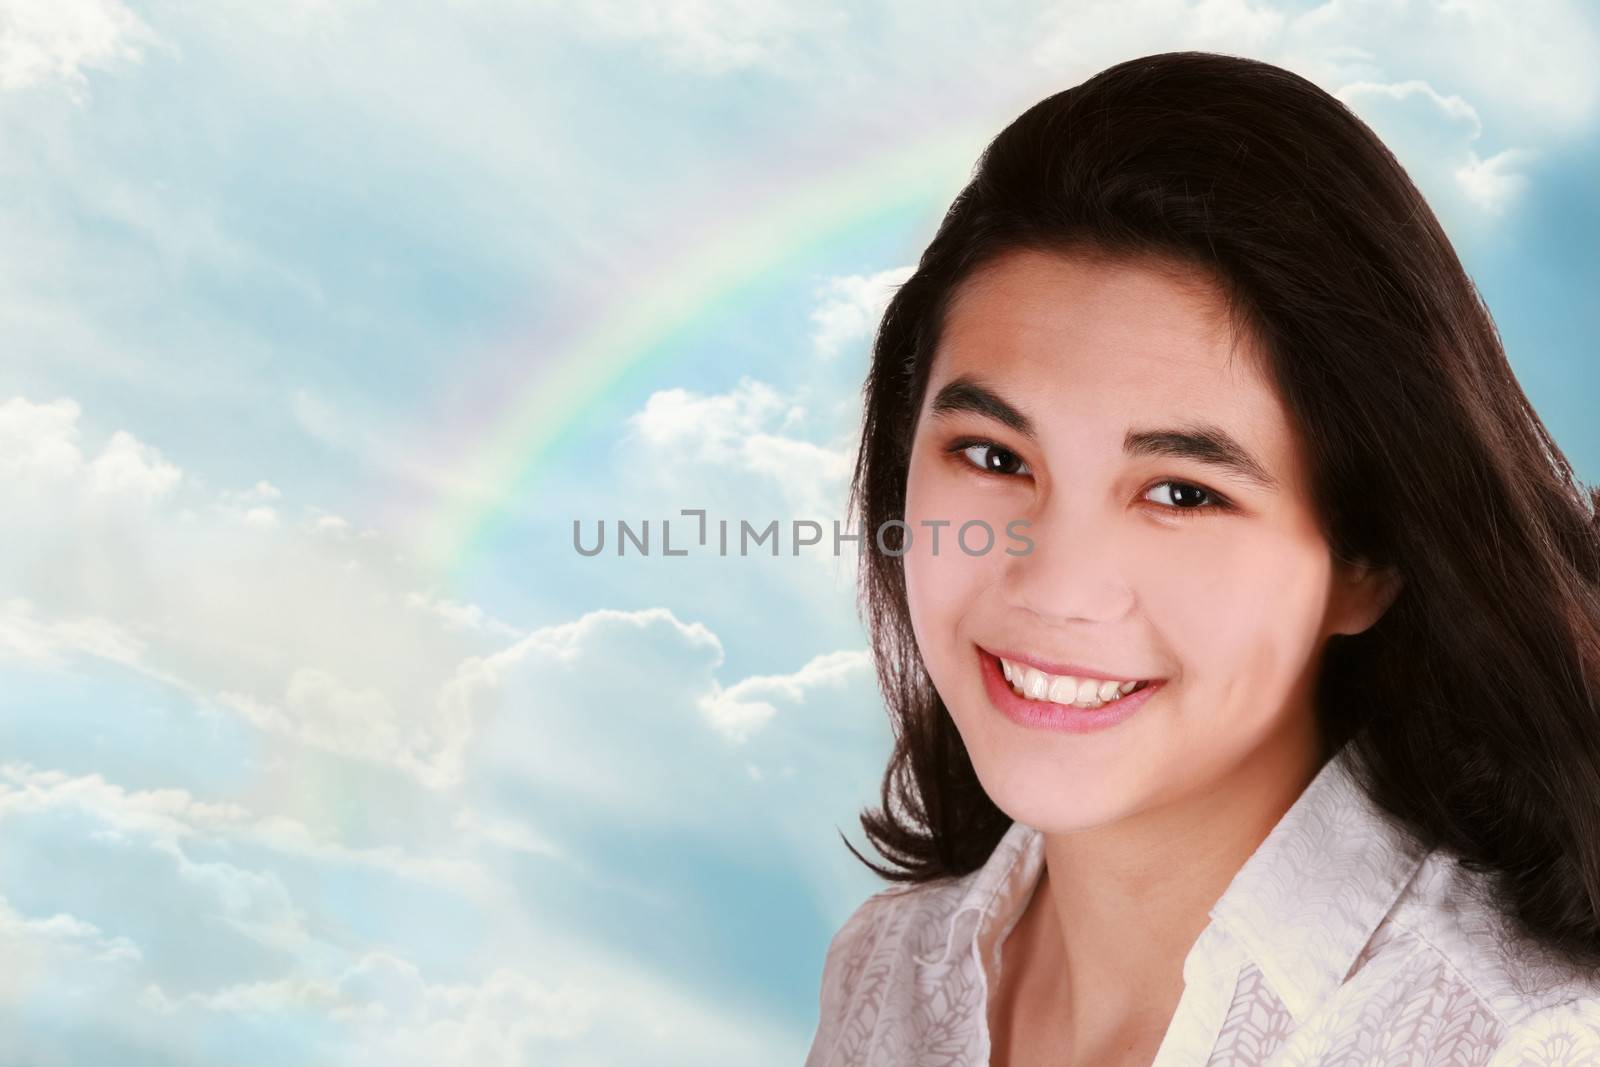 Teen girl  with beautiful clouds and rainbow in background by jarenwicklund